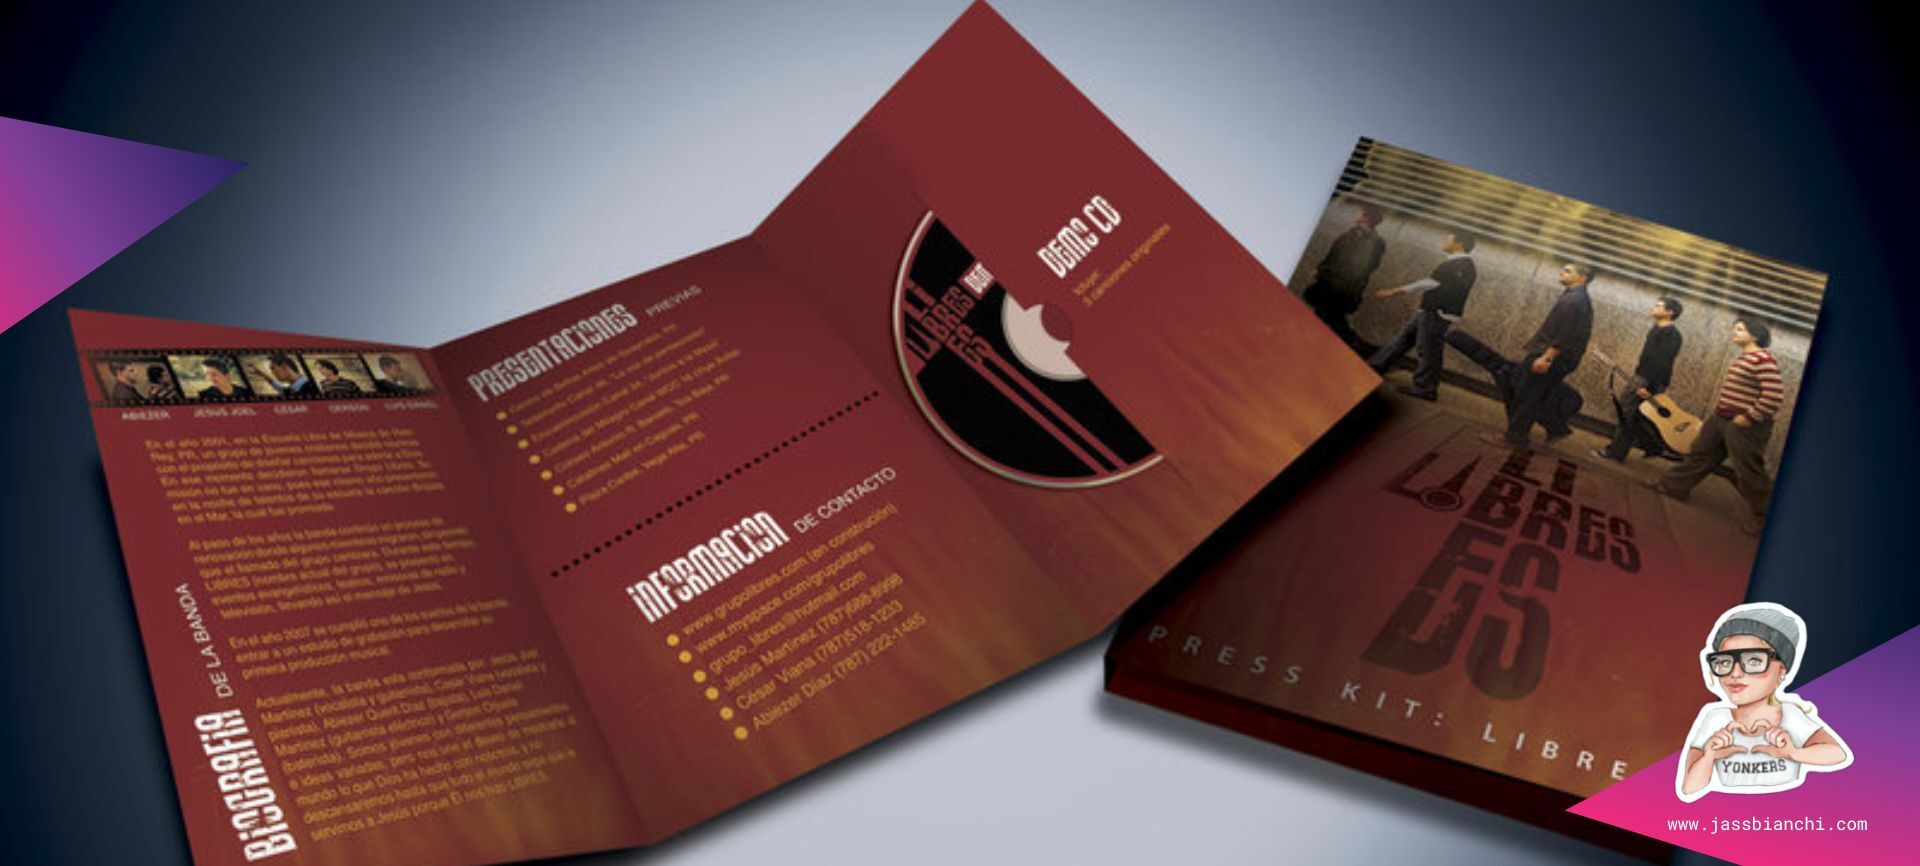 How to Use Press Kits to Get More Gigs and Exposure for Your Music